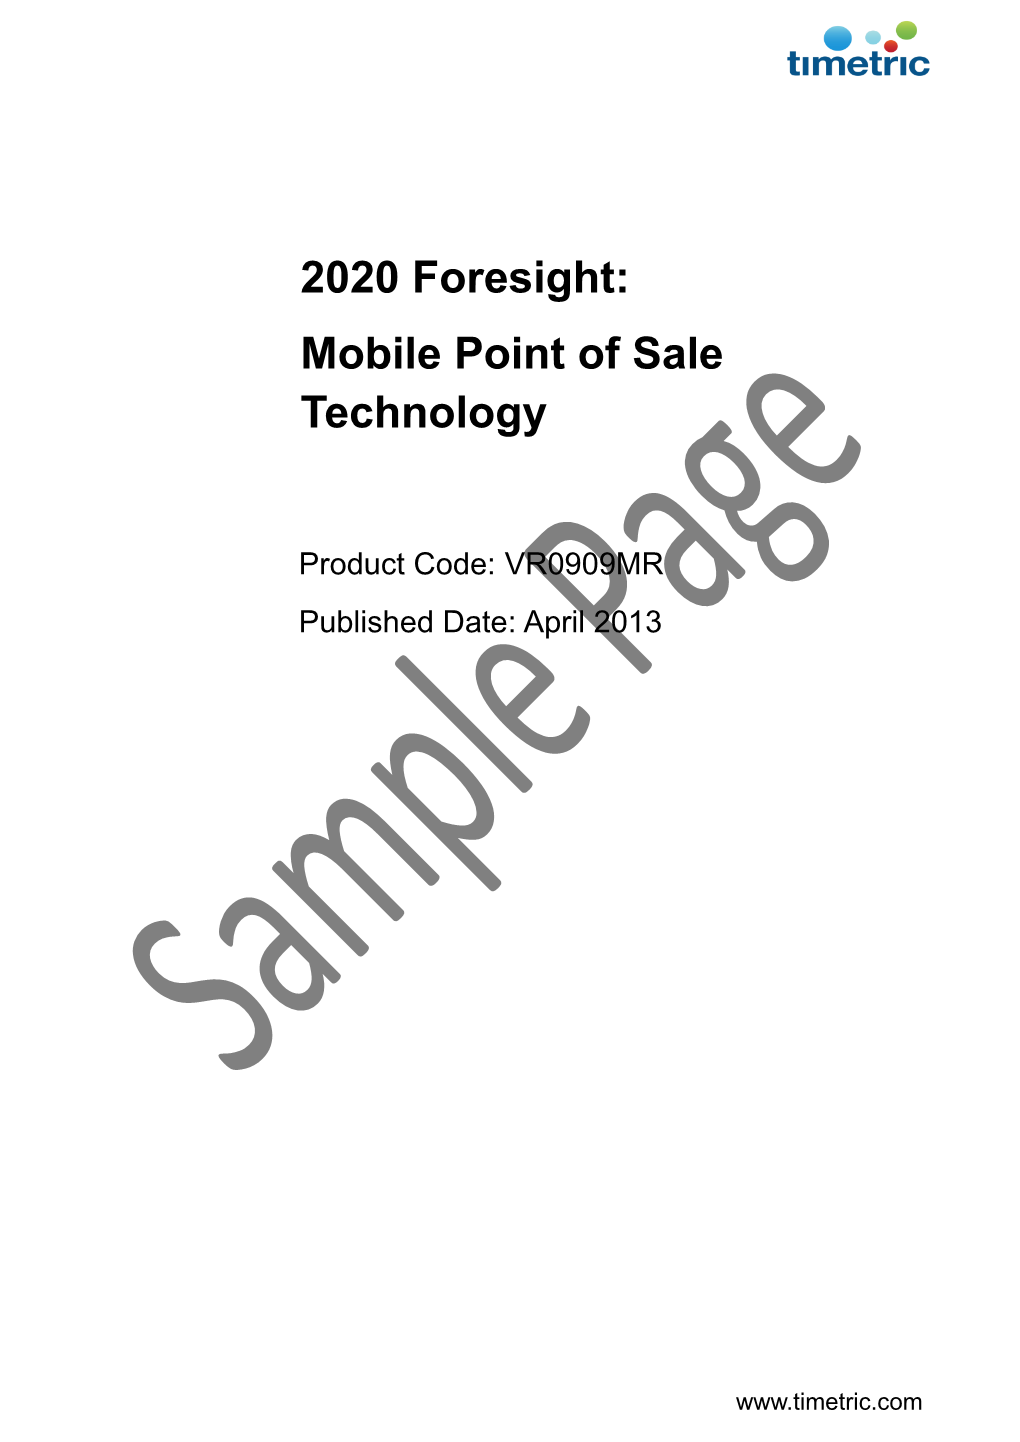 2020 Foresight: Mobile Point of Sale Technology